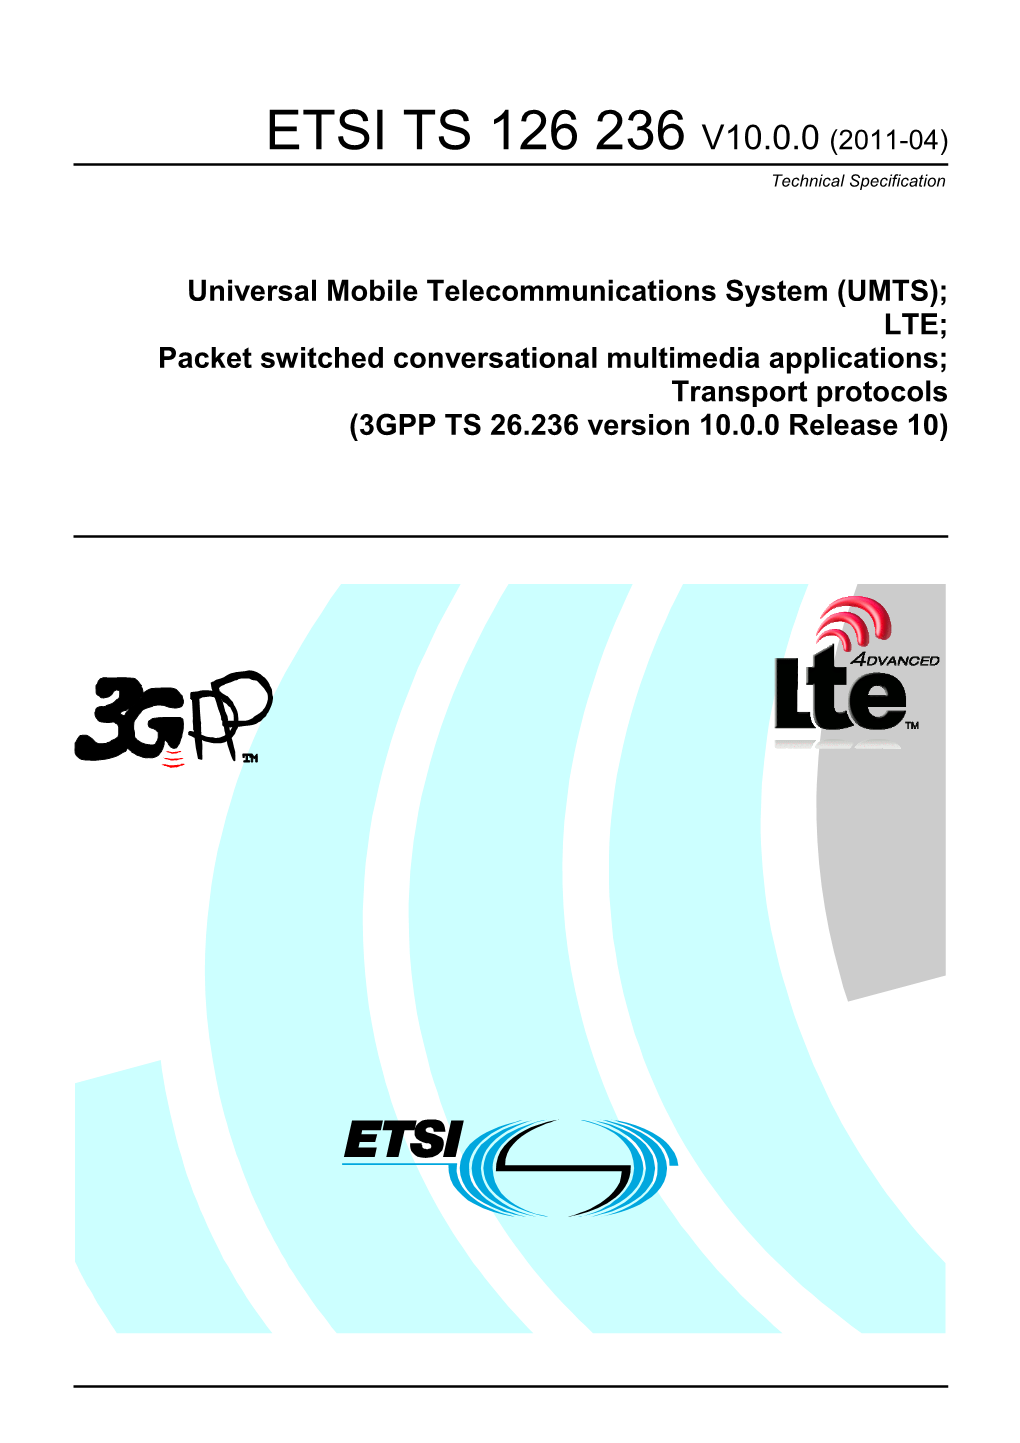 LTE; Packet Switched Conversational Multimedia Applications; Transport Protocols (3GPP TS 26.236 Version 10.0.0 Release 10)